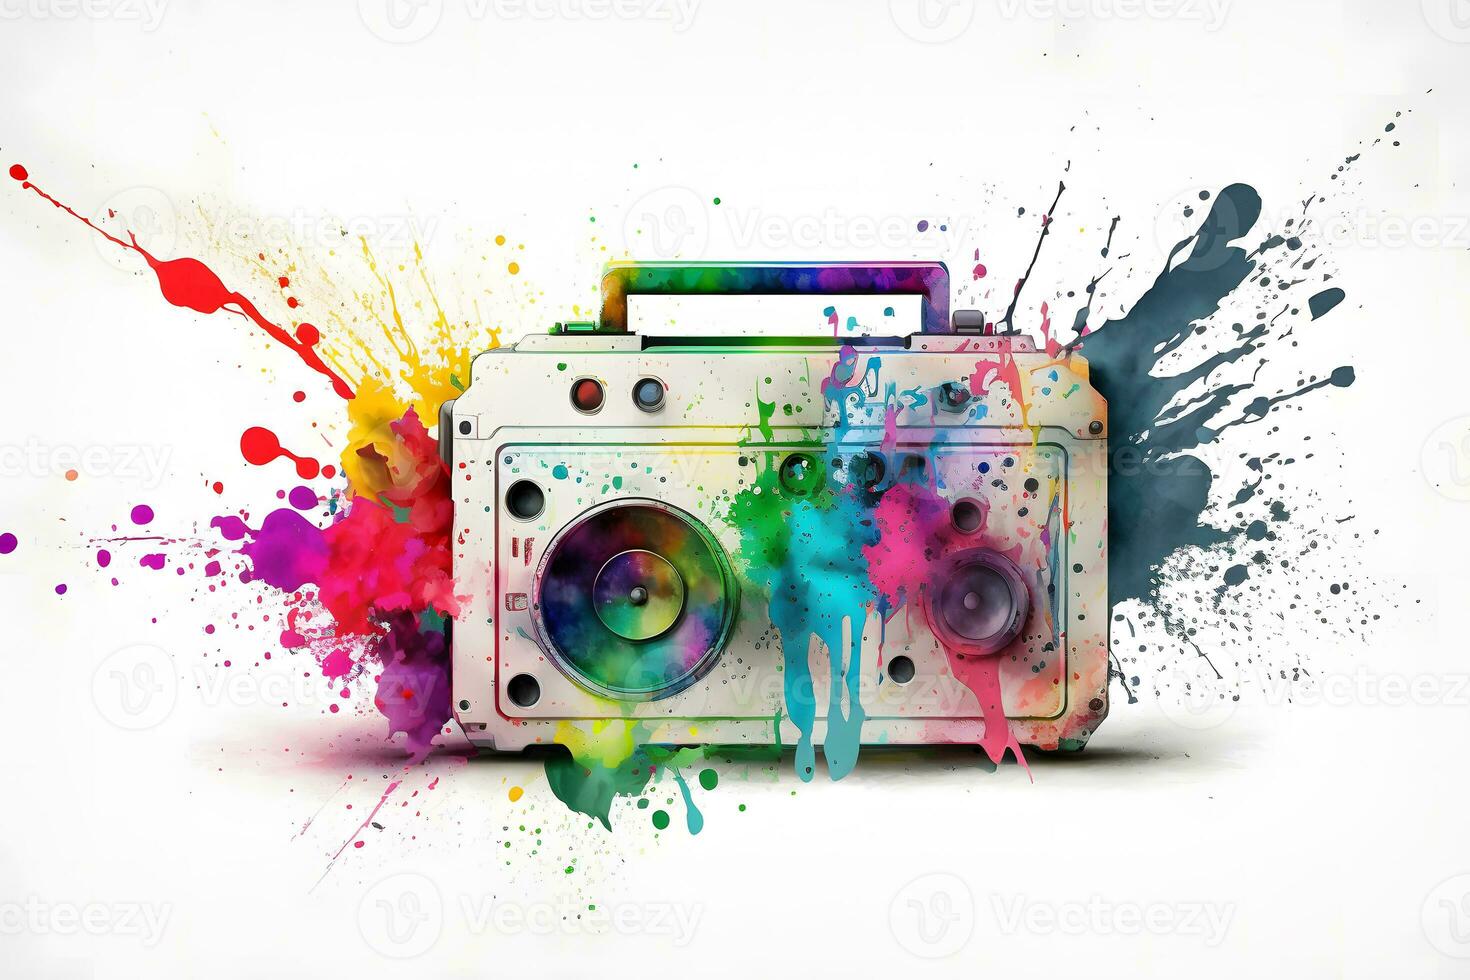 Retro ghetto blaster isolated on white with rainbow watercolor splash. Neural network AI generated photo